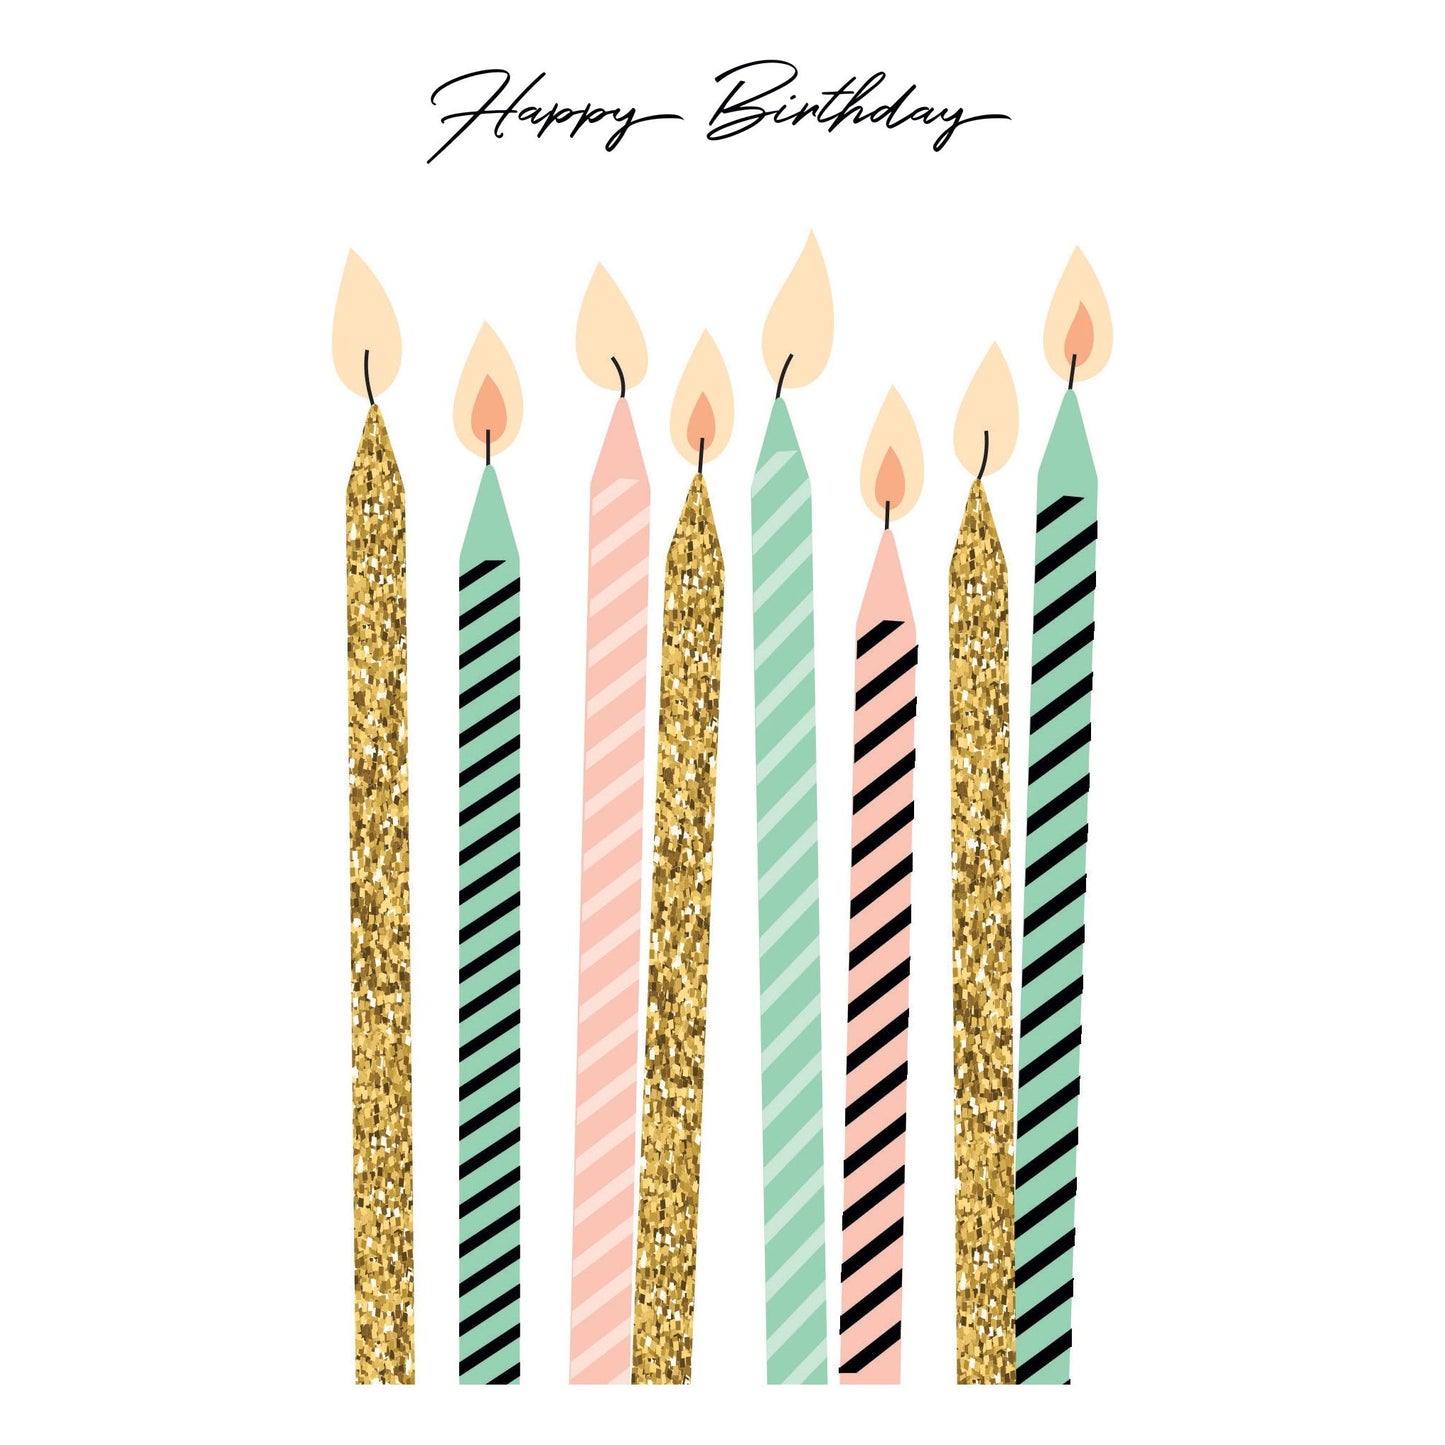 Striped Candles Birthday Card - Cardmore